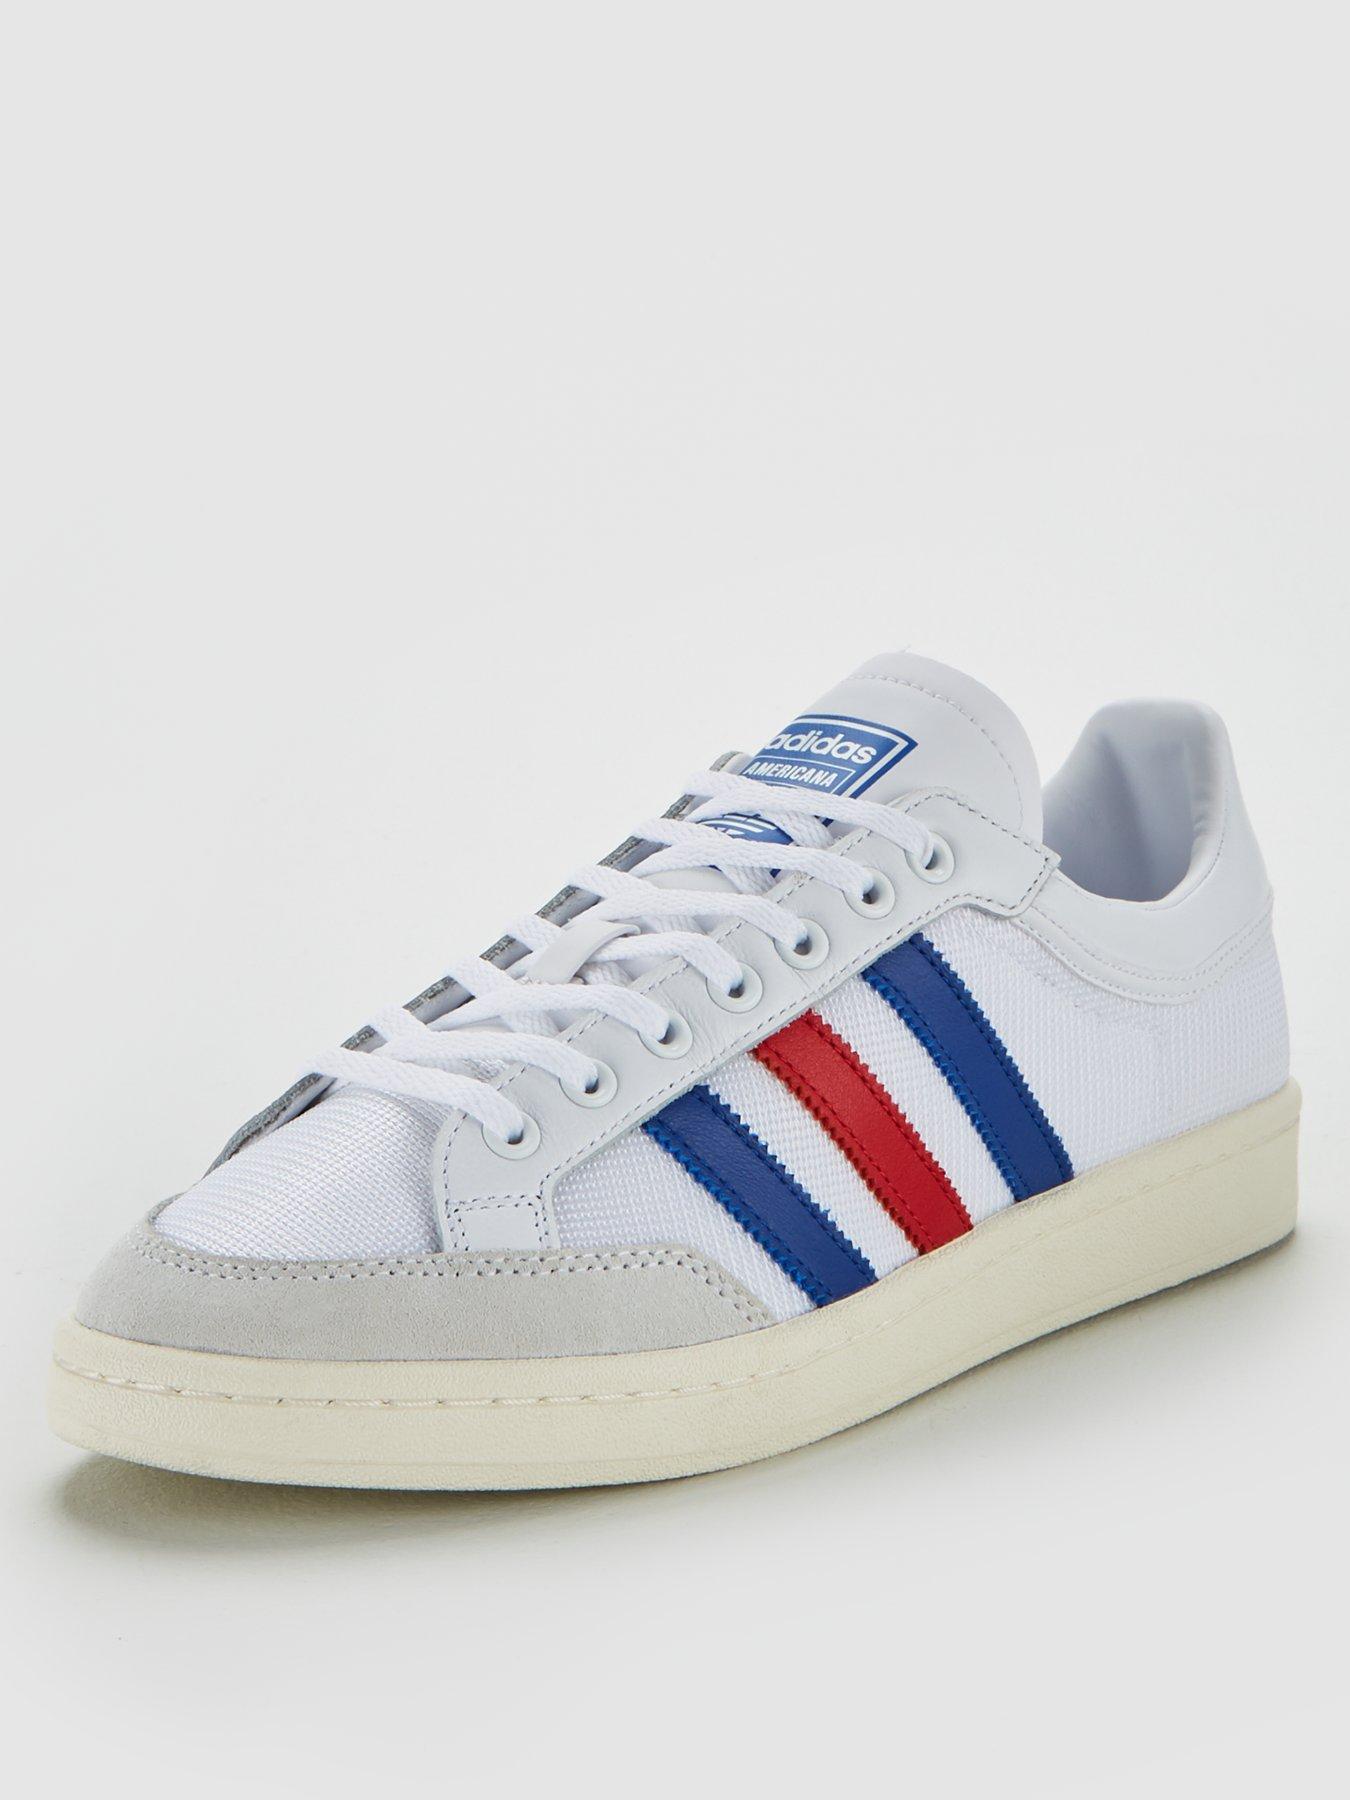 adidas blue white red